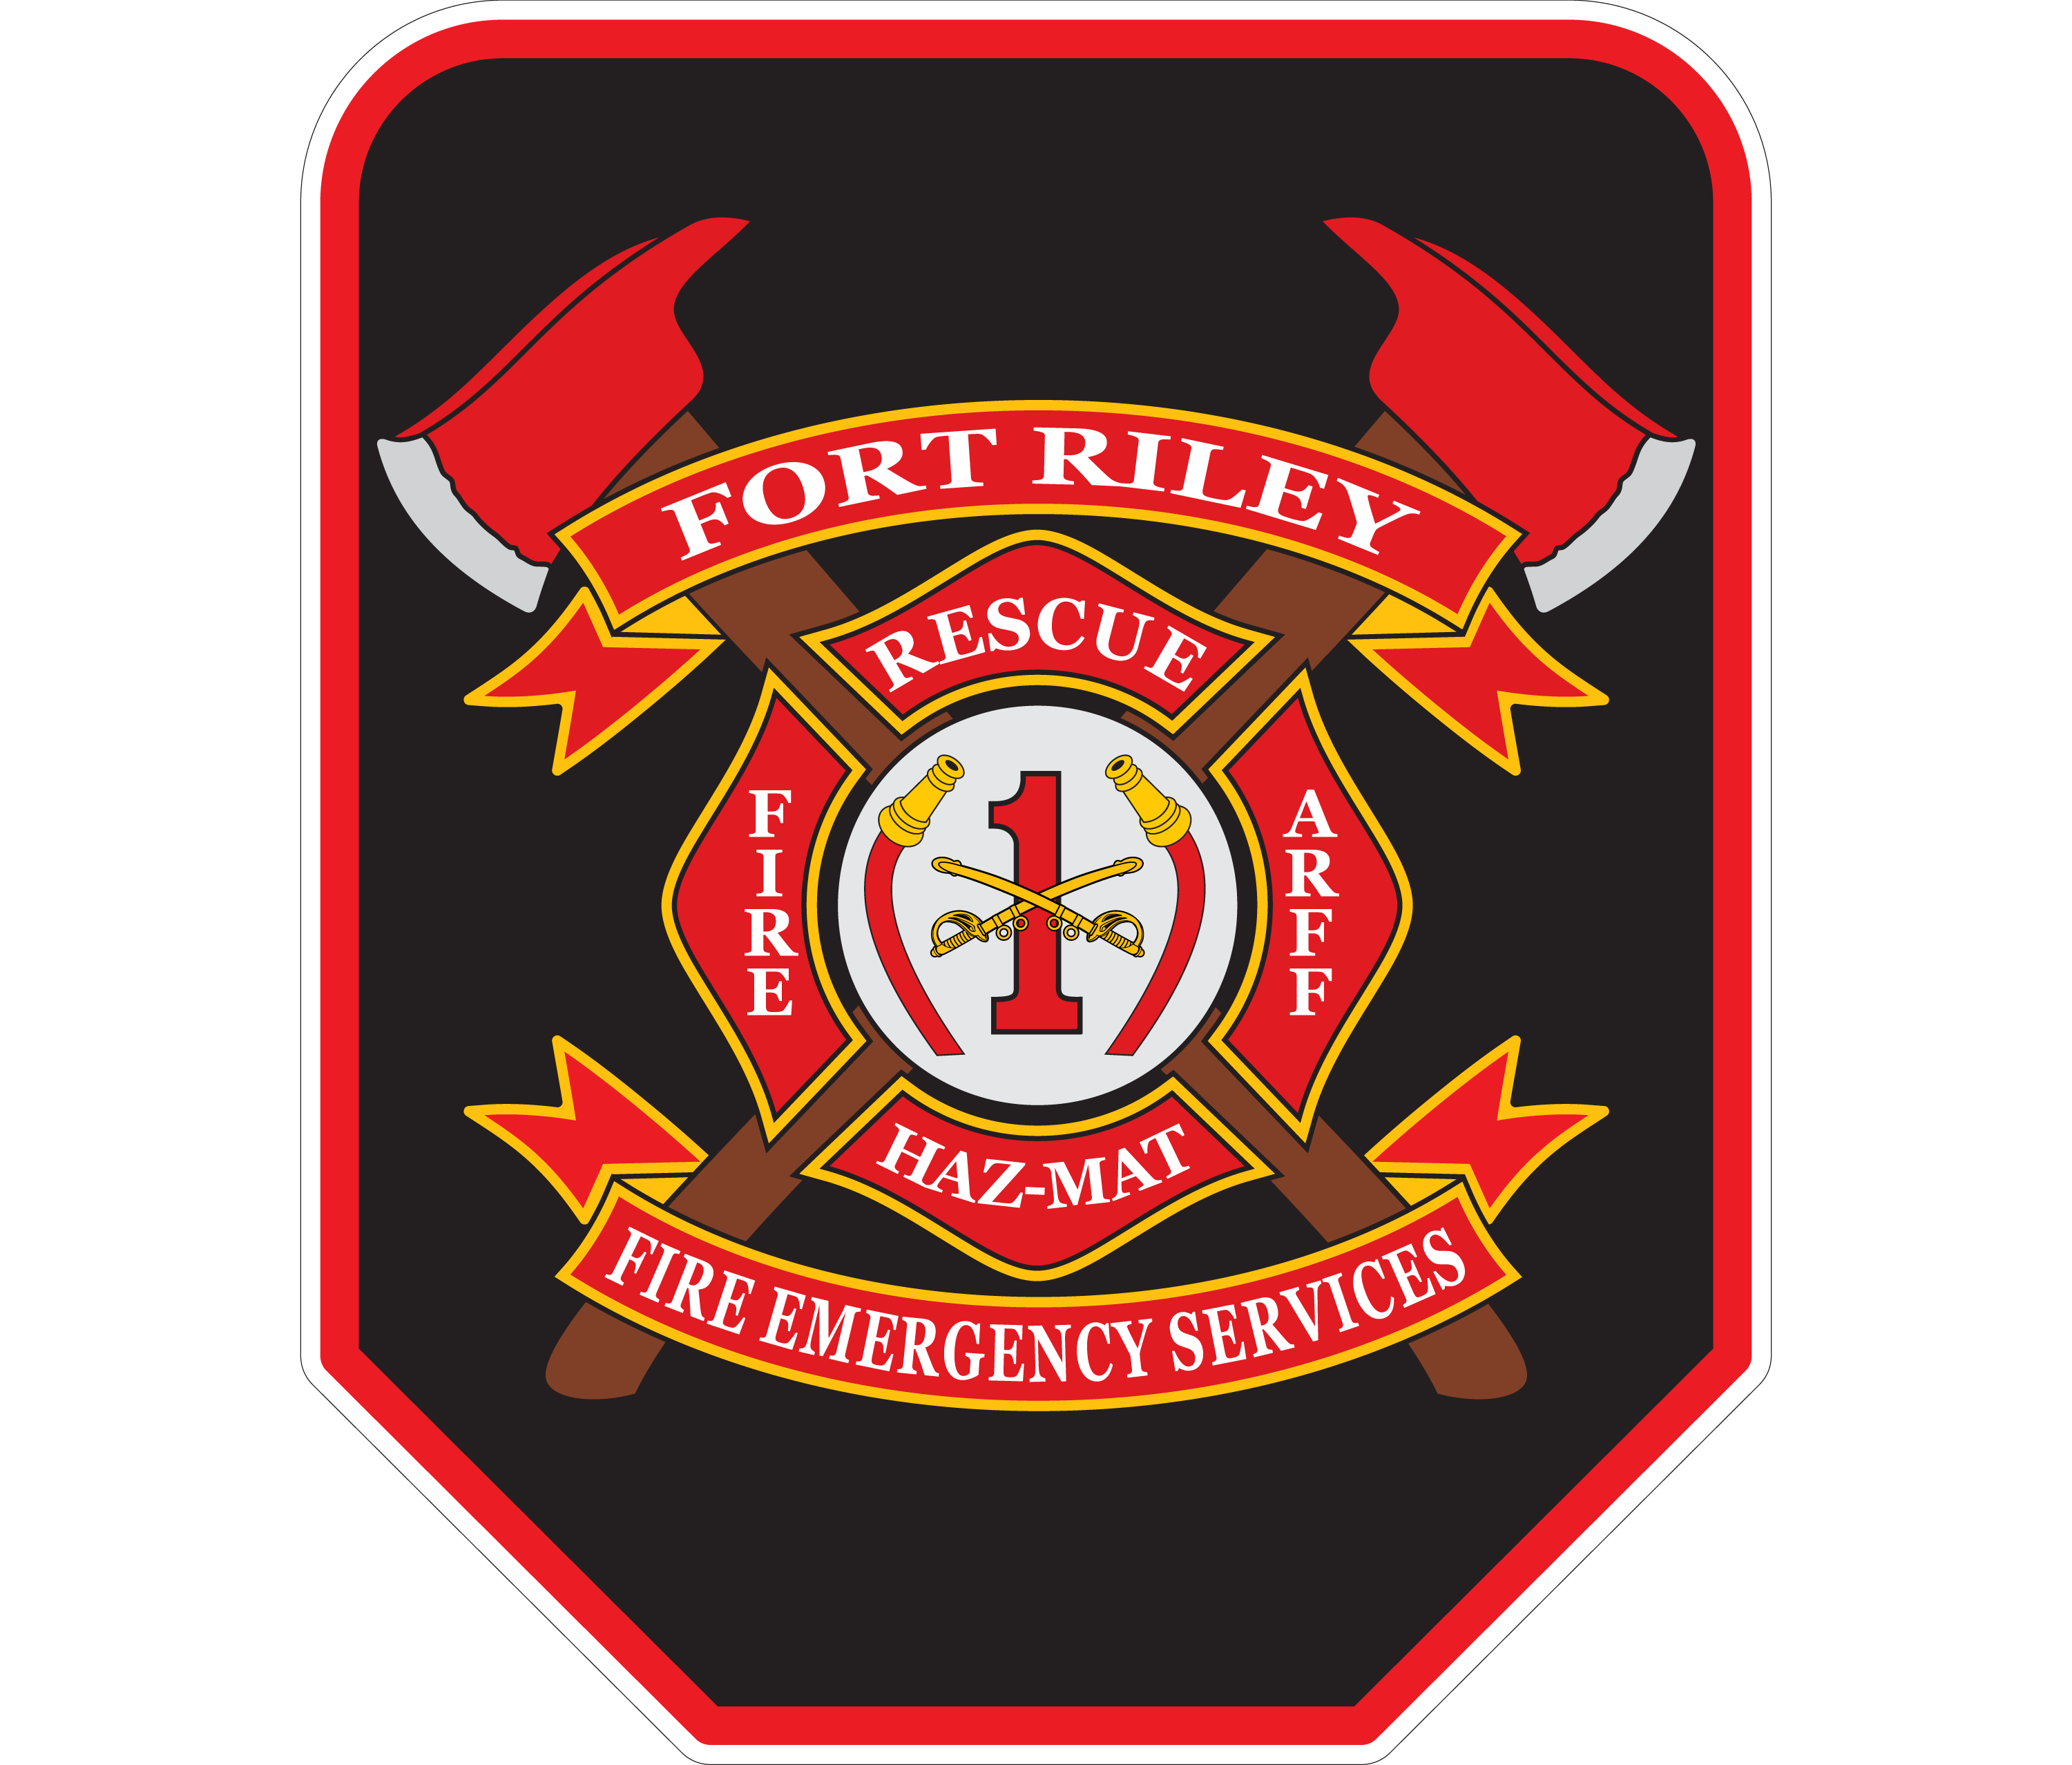 FORT RILEY FIRE